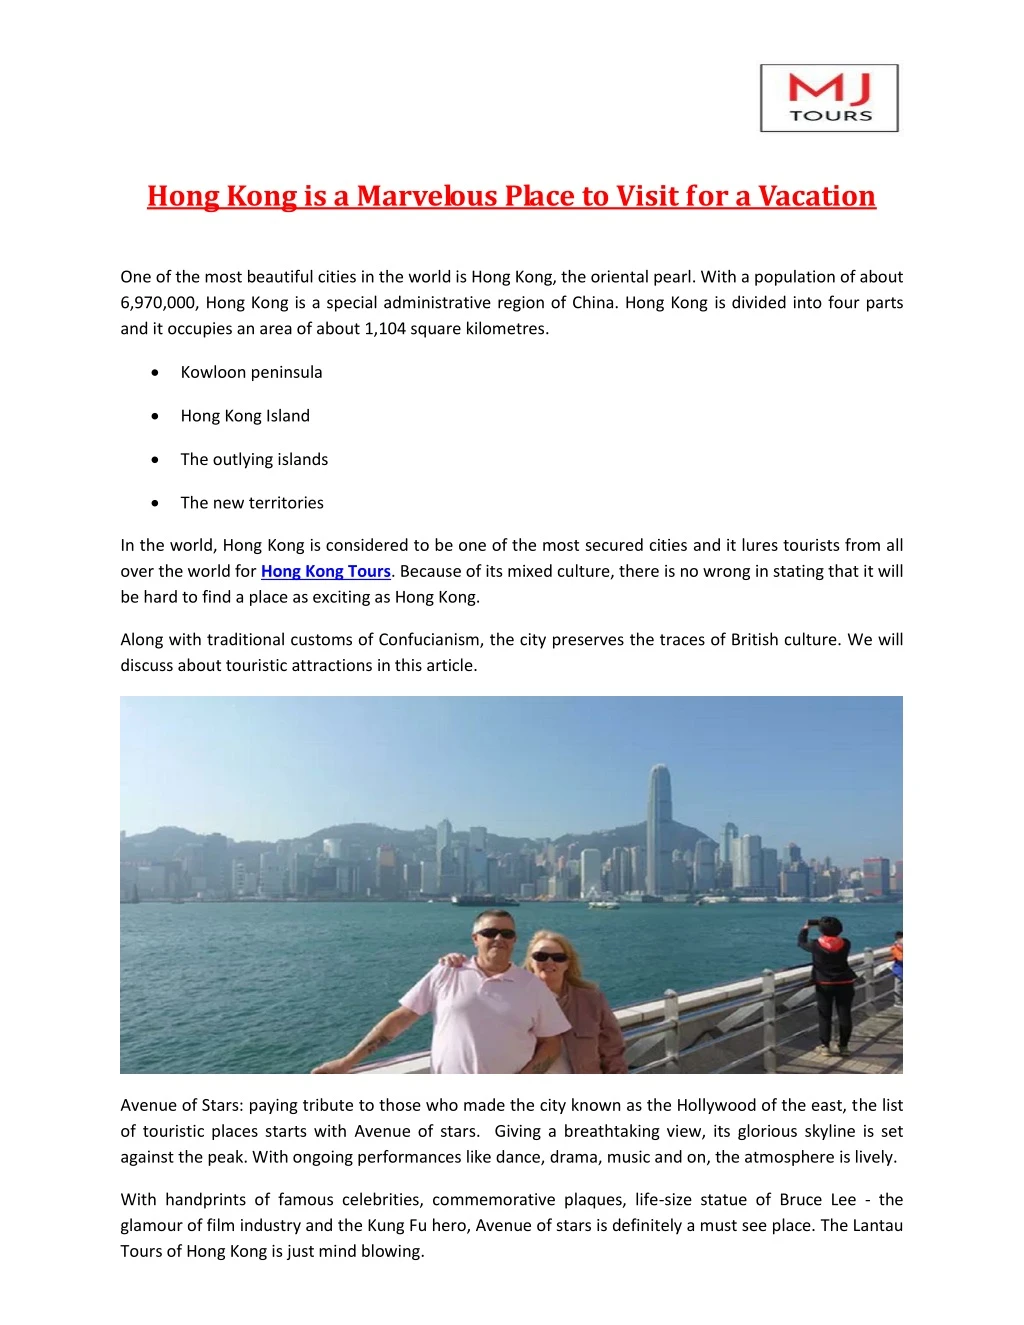 hong kong is a marvelous place to visit